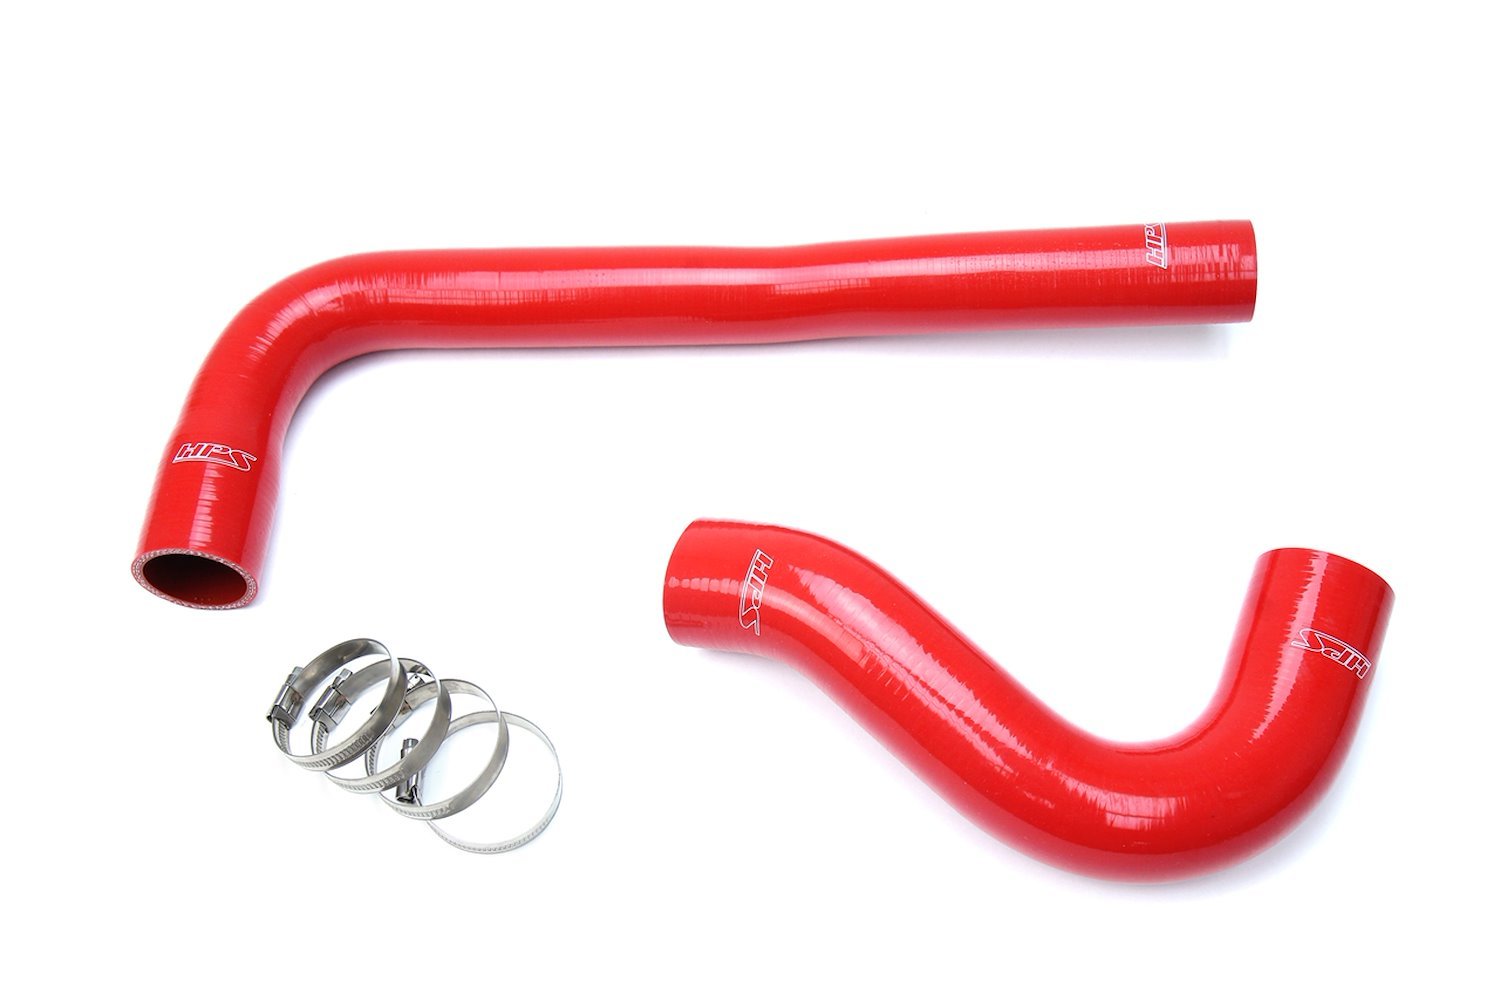 57-1322-RED Radiator Hose Kit, High-Temp 3-Ply Reinforced Silicone, Replace OEM Rubber Radiator Coolant Hoses